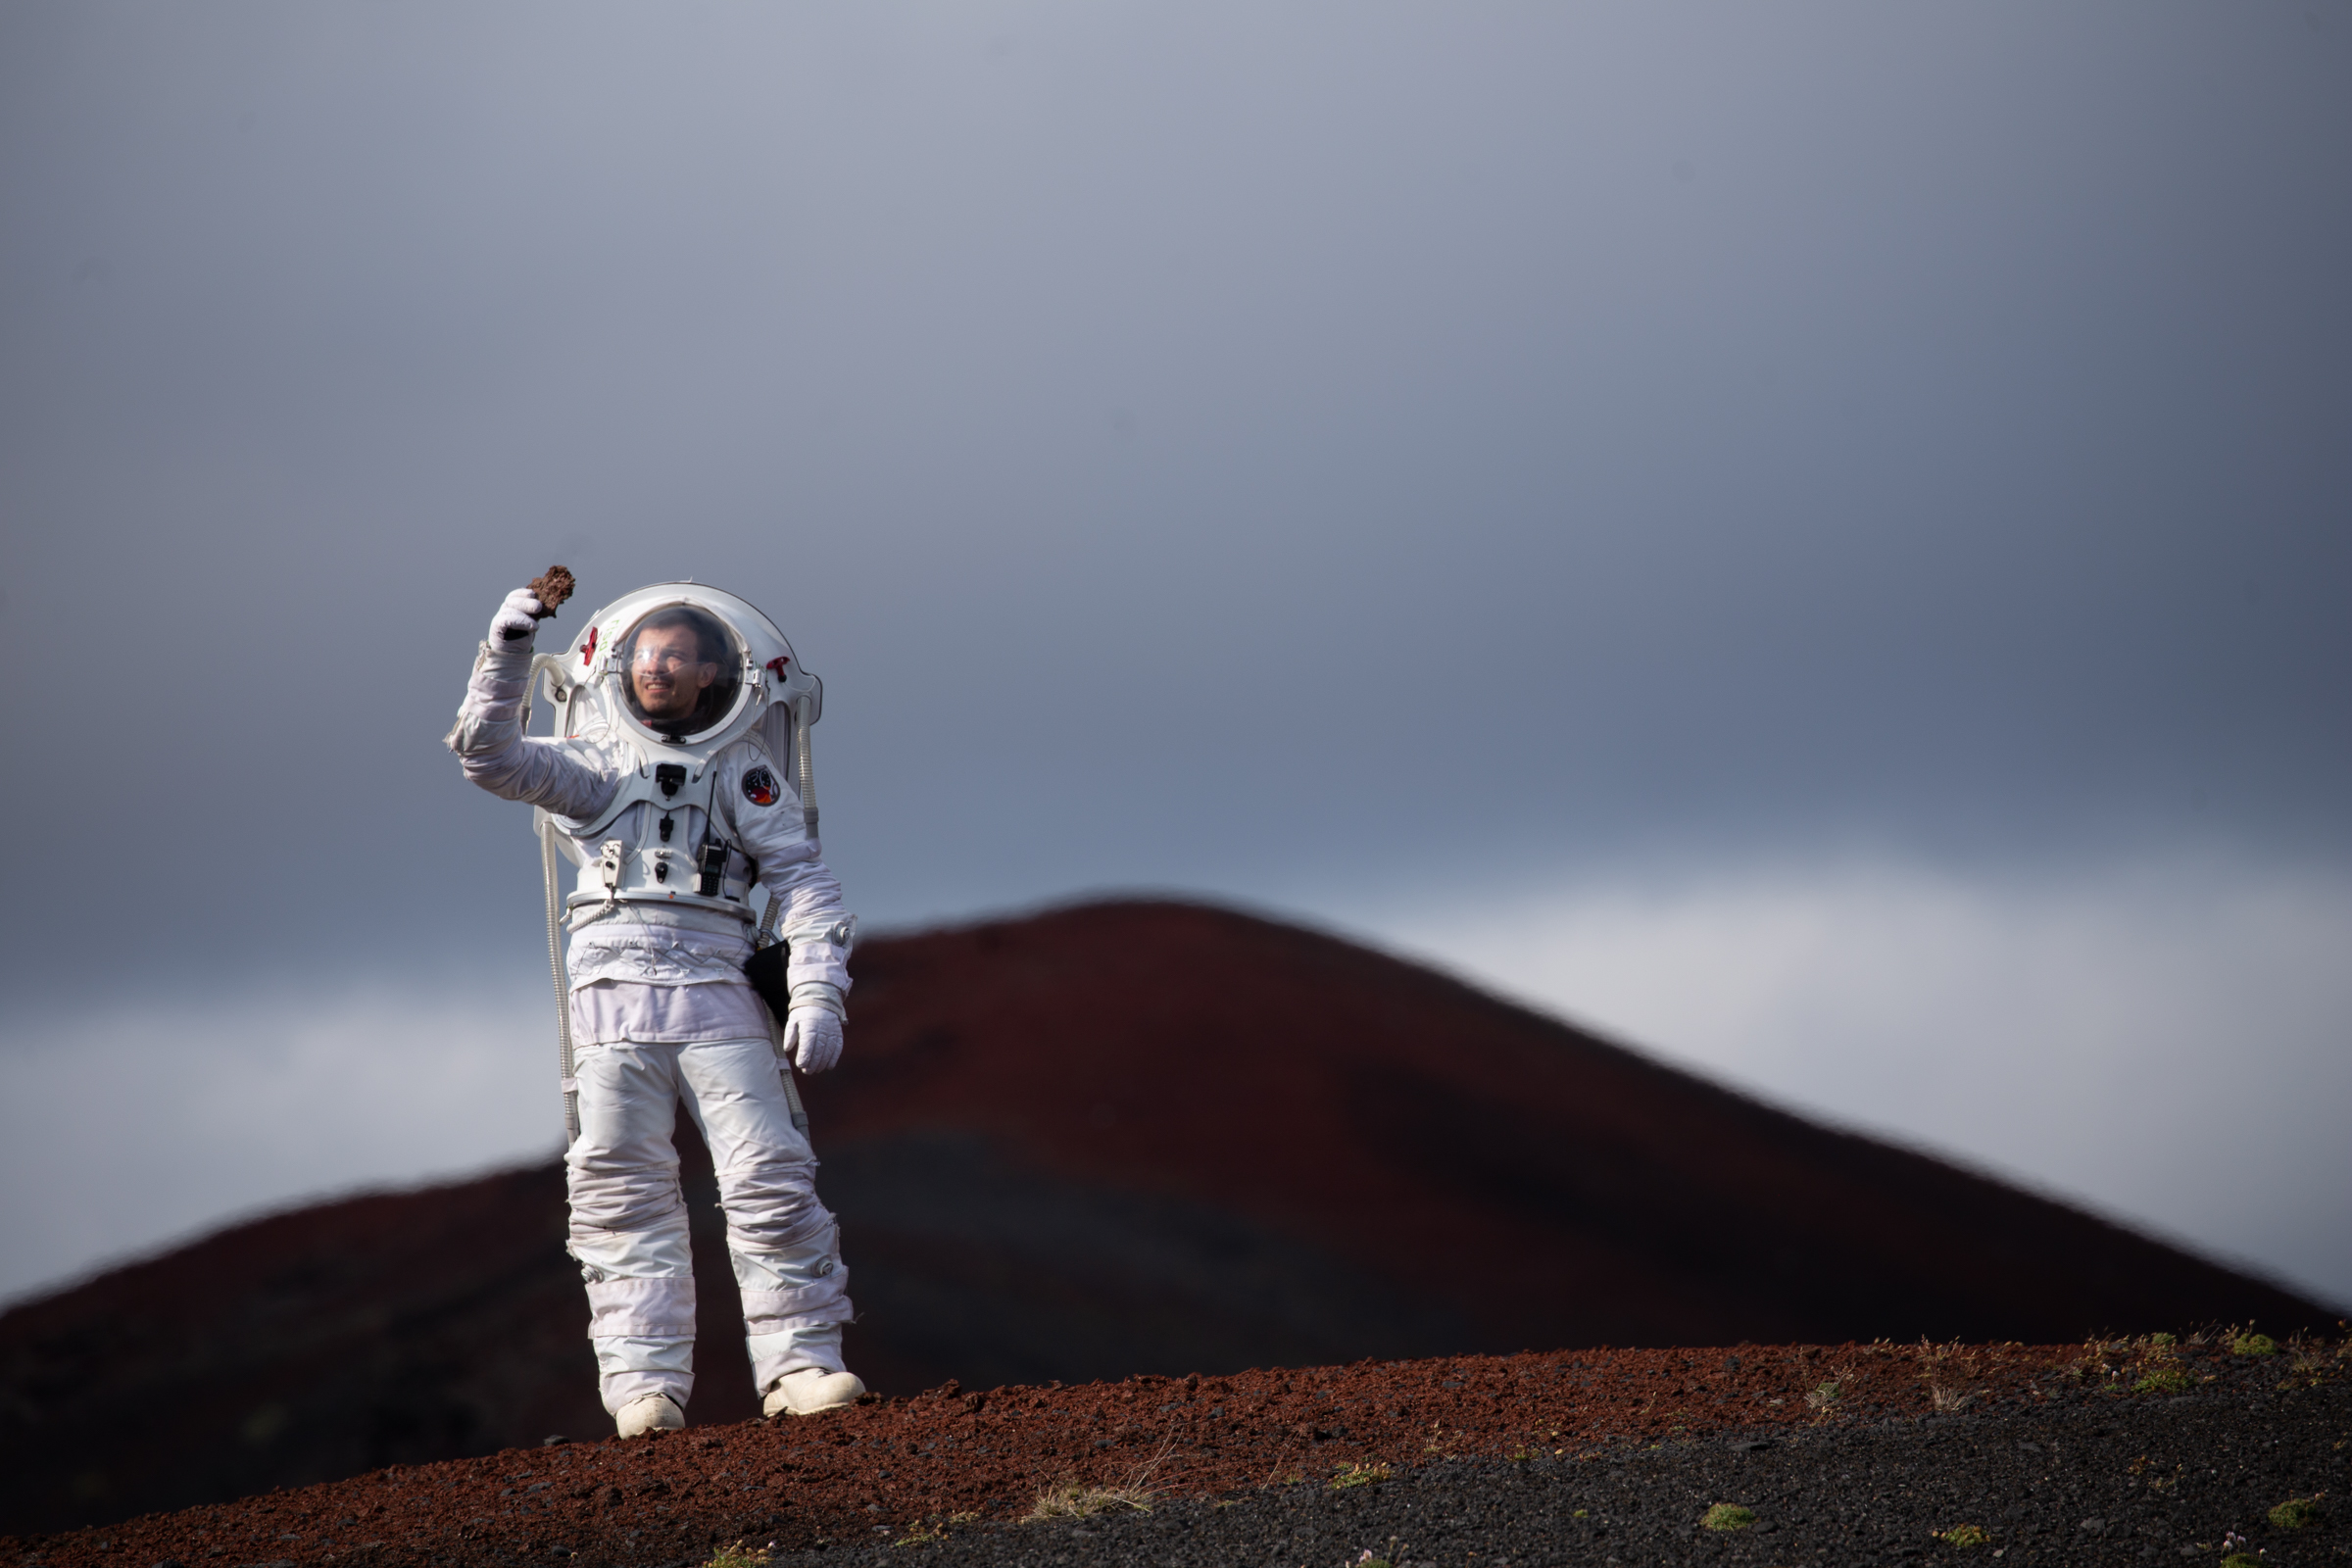 A researcher evaluates the MS1 suit in Iceland to inform the development of an Artemis-generation MS2 moon and an analog Mars spacesuit.  MS1 was designed by the Rhode Island School of Design with input from NASA and its Johnson Space Center.